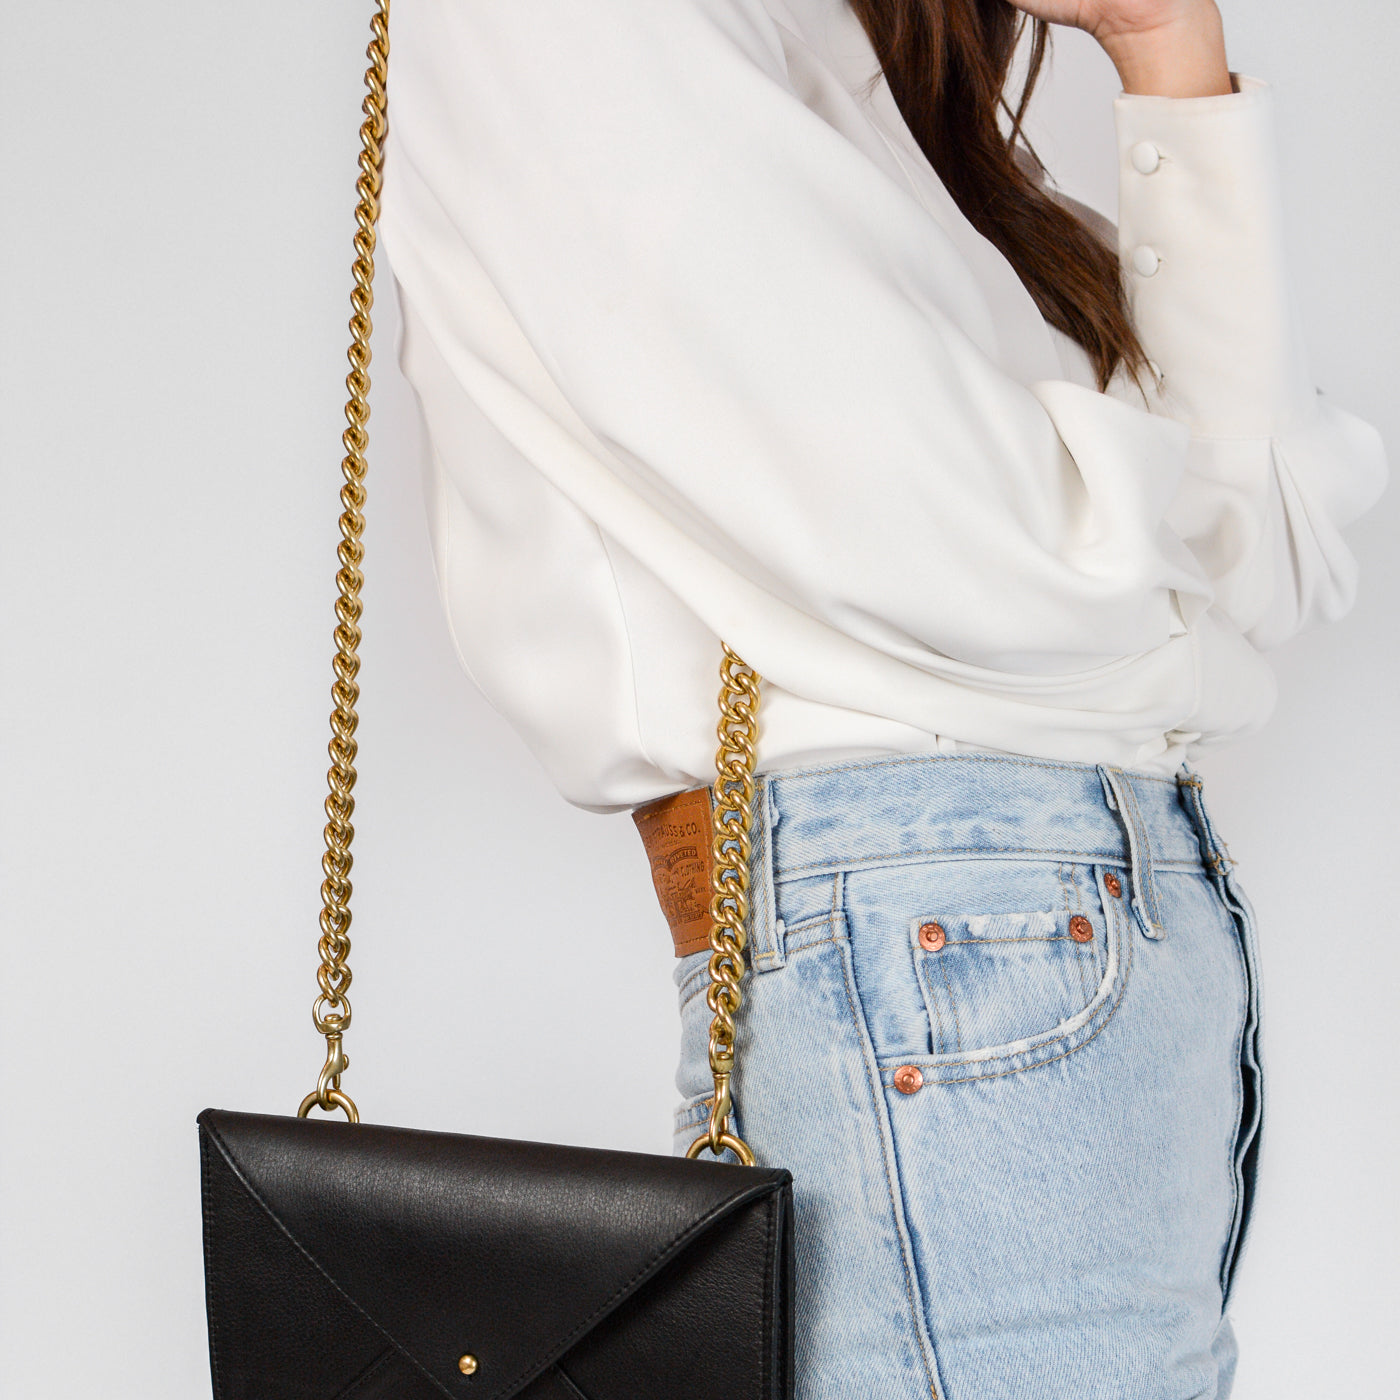 Classic Woman Hand Bags Genuine Leather Flap Clutch Shoulder Small Female  Package Lamb Purse Gold Chain Fashion Bag Wholesale A7 From 6,48 € | DHgate